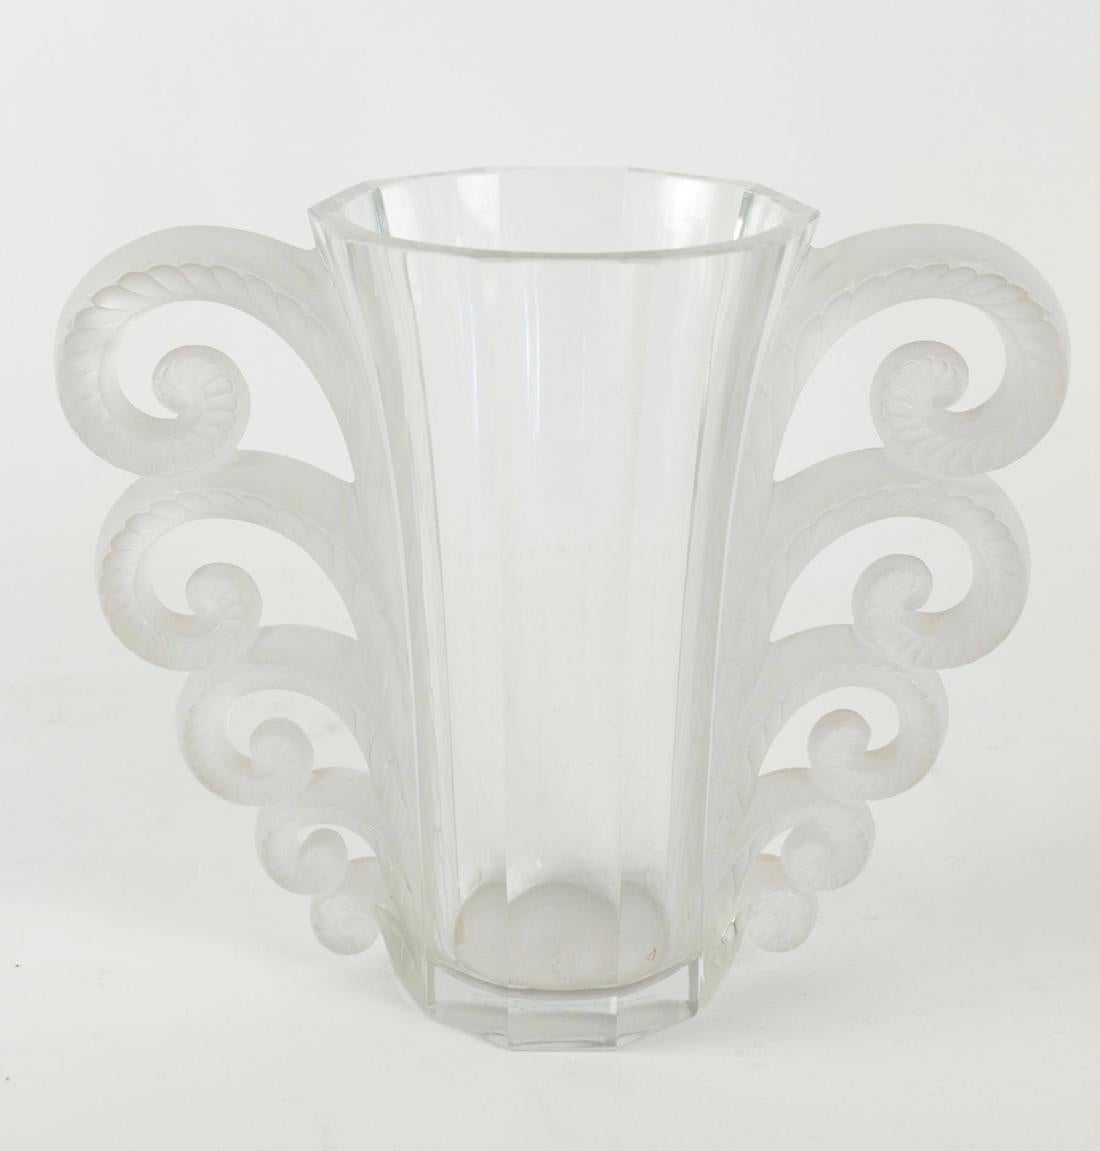 René Lalique

Vase “Beauvais”,

Proof made in pressed-moulded glass, white, matt and shiny satin with facetted body).

Signed R Lalique France
High. : 19.5cm

Bibliography:
Félix Marcilhac, “René Lalique”, catalog raisonné of the work of